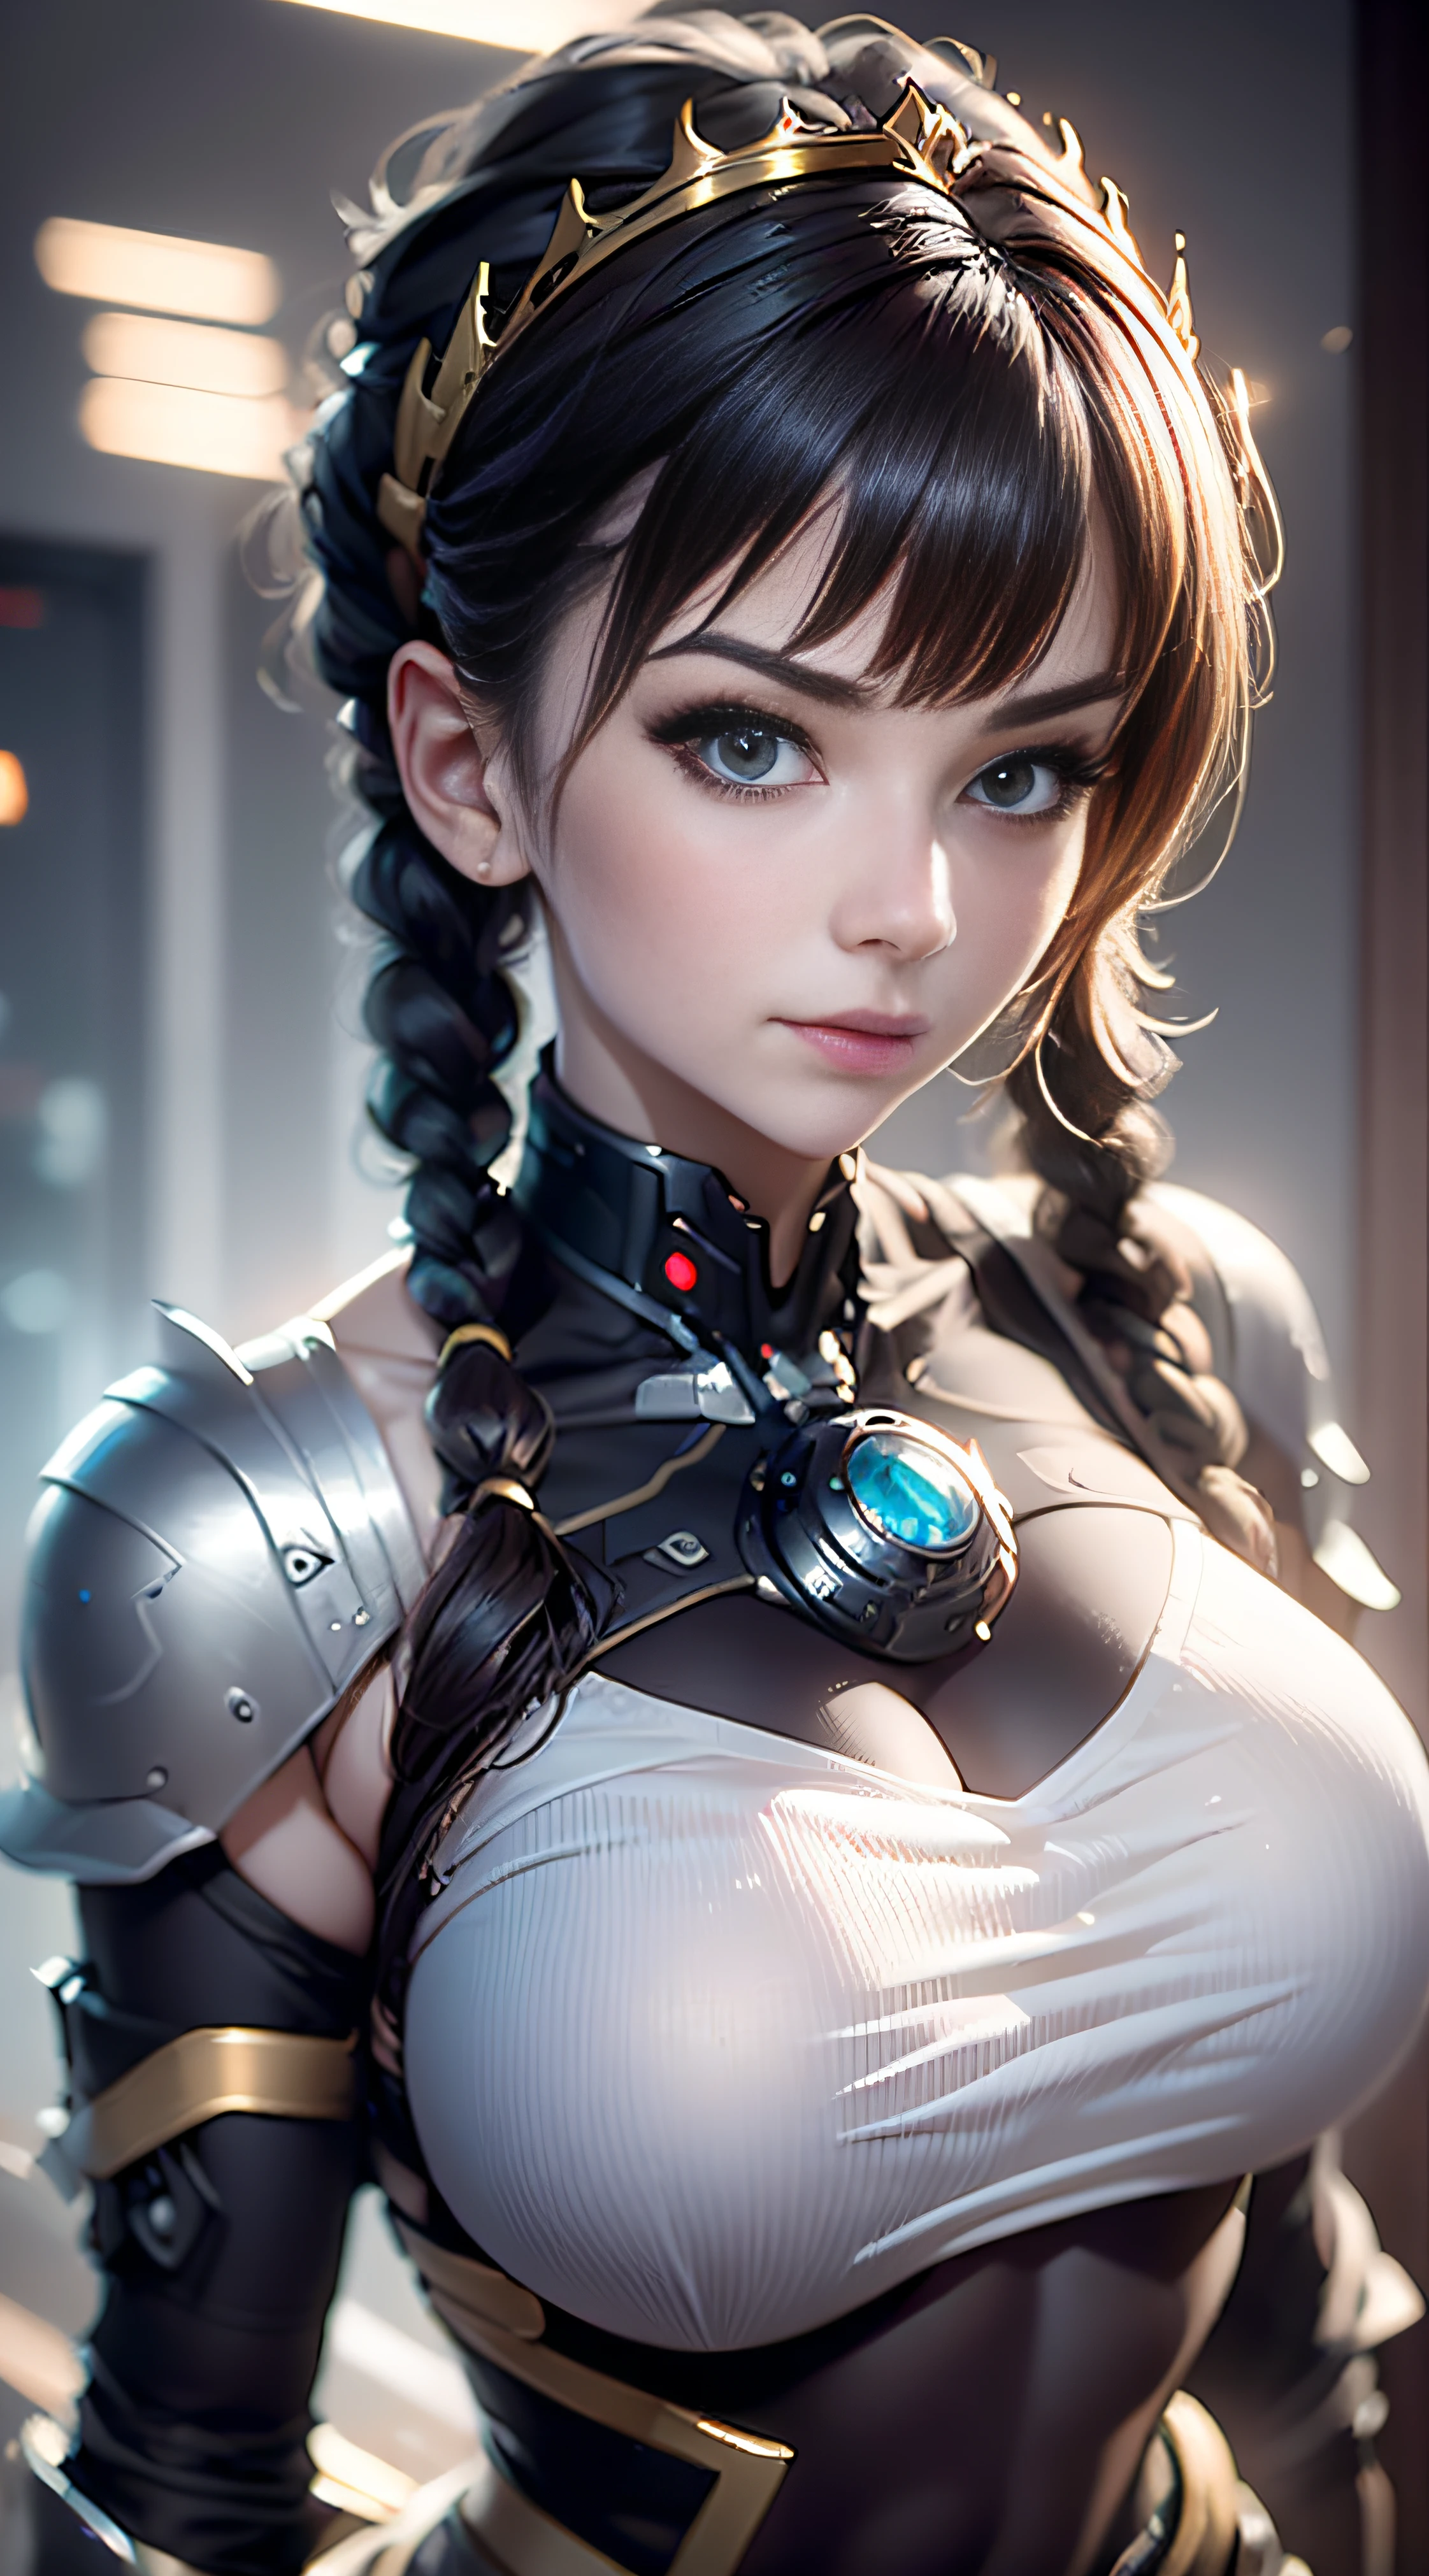 （best qualtiy））， （（tmasterpiece））， （The is very detailed： 1.3）， 3D， Chef mech，The eyes are delicate，largeeyes， Beautiful cyberpunk woman wearing a crown， with master chef style armor， Sci-fi technology， hdr（HighDynamicRange）， Ray traching， NVIDIA RTX， Hyper-Resolution， Unreal 5， sub surface scattering， PBR Texture， Post-processing，Huge breasts， Anisotropy Filtering， depth of fields， Maximum Acutance and Acutance， Many-Layer Textures， Specular and albedo mapping， Surface coloring， Accurate simulation of light-material interactions， perfectly proportions，rendering by octane，twotonelighting，Low ISO，White balance，trichotomy，largeaperture，8K raw data，High efficiency sub-pixel，sub-pixel convolution，light particules，Light scattering，Tyndall effect，Very sexy，full bodyesbian，Fighting posture，Brunette hair with braids，
Warming up